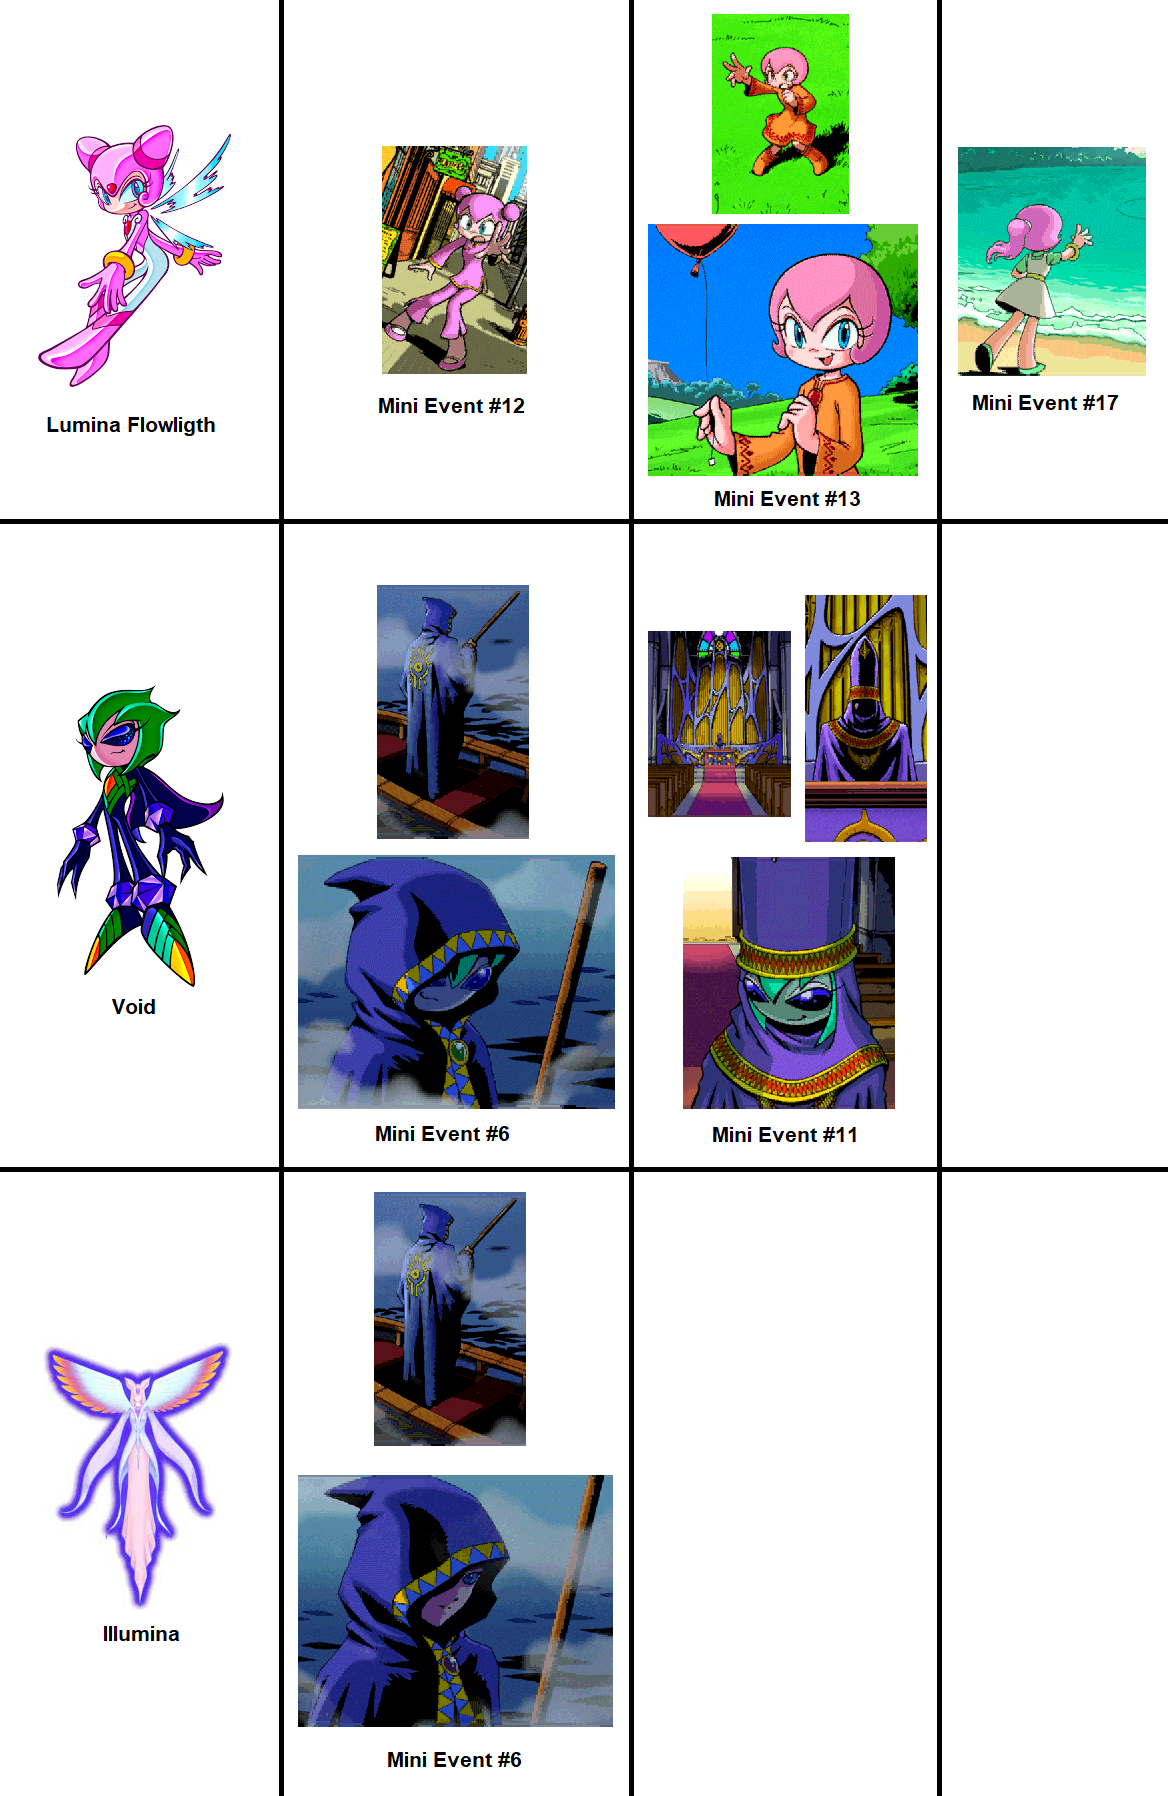 My Played Sonic Games Tier List by earthbouds on DeviantArt